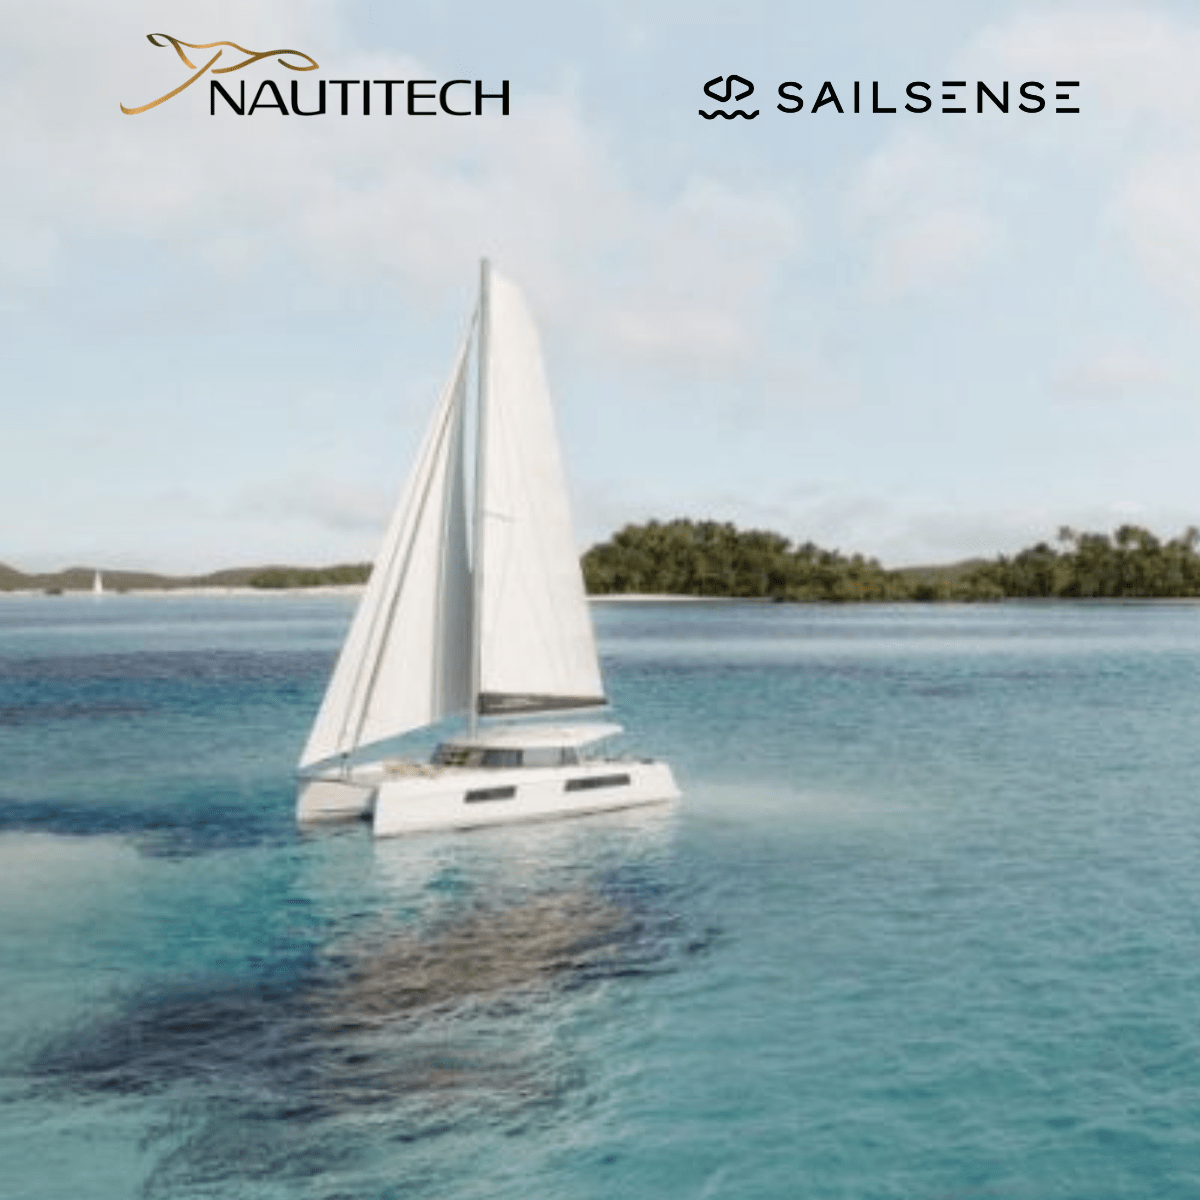 Nautitech has chosen Sailsense Analytics to equip their new 44 Open Catamaran with the most advanced connected technologies